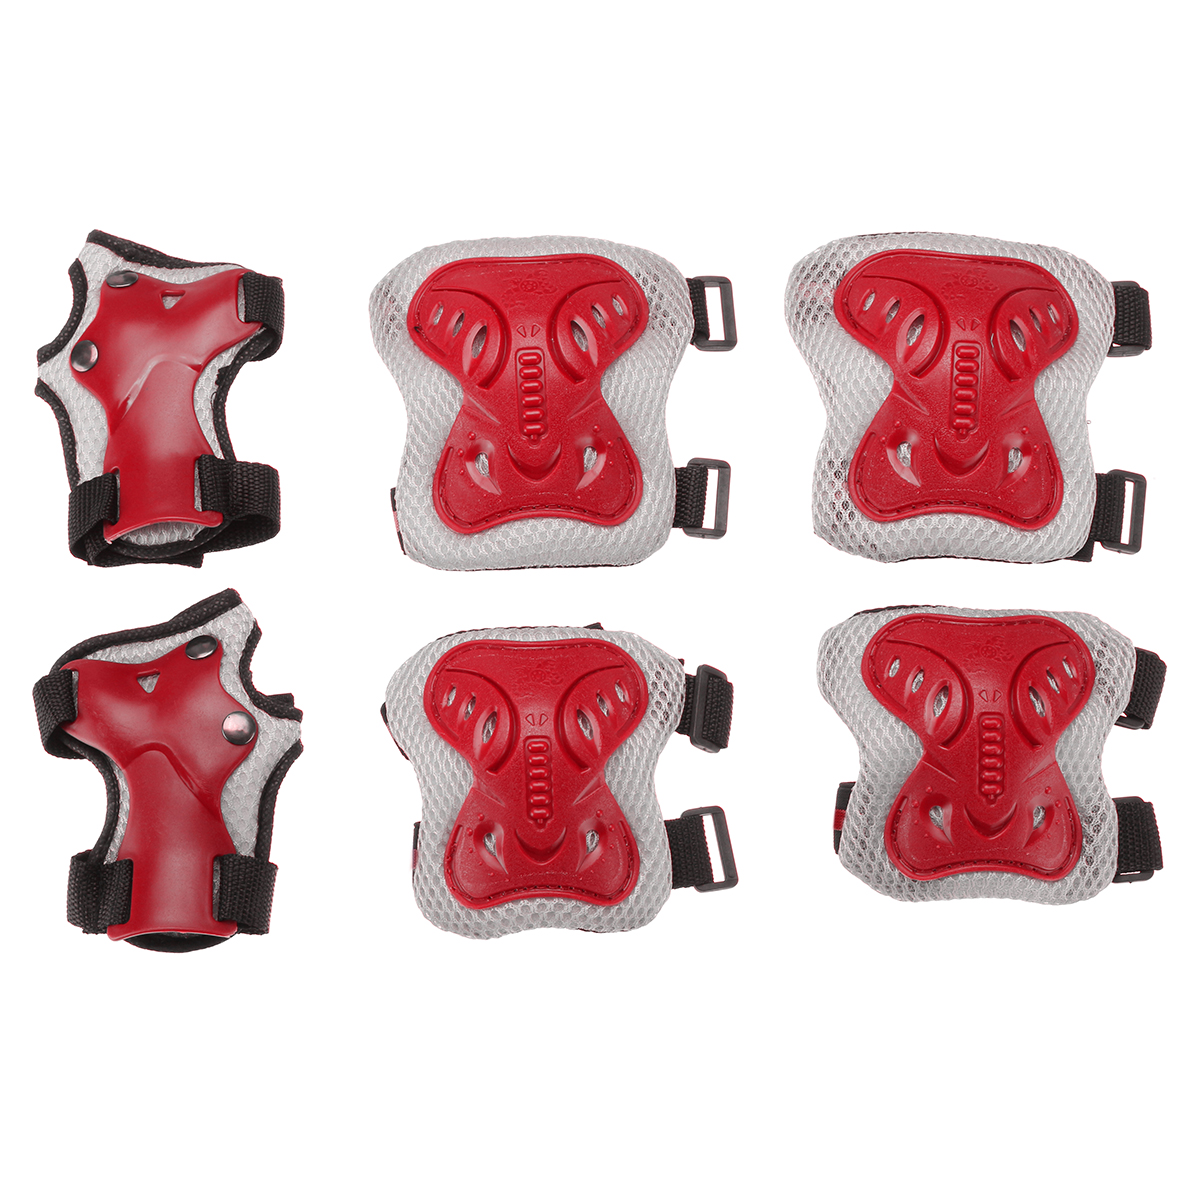 6PCS-Set-Adult-Children-KneeElbowWrist-Pads-Protective-Gears-for-Skateboard-Bicycle-Ice-Inline-Rolle-1796809-7